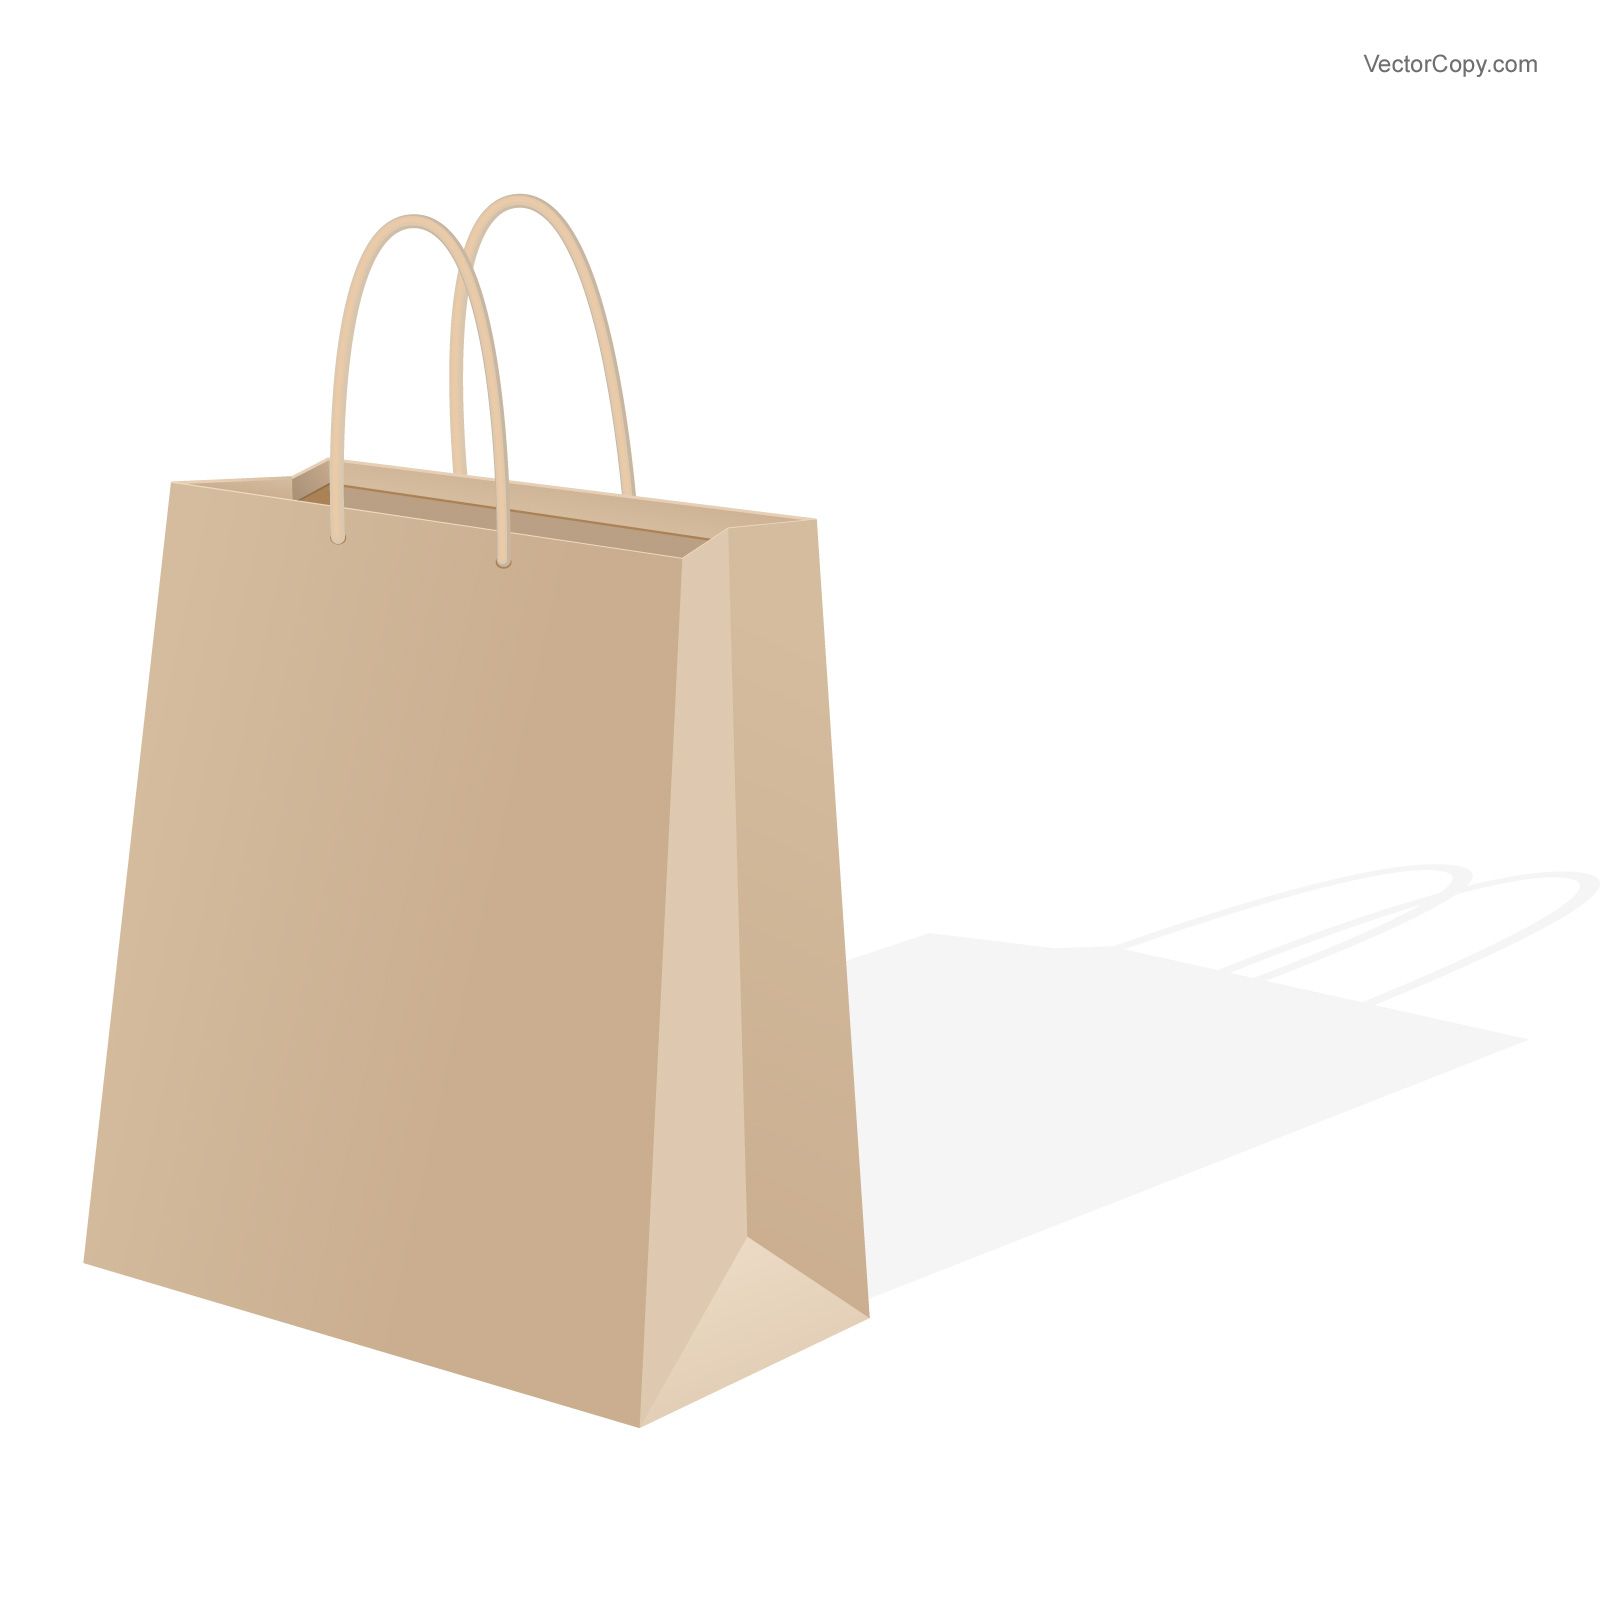 Paper shopping bag, download free vector images